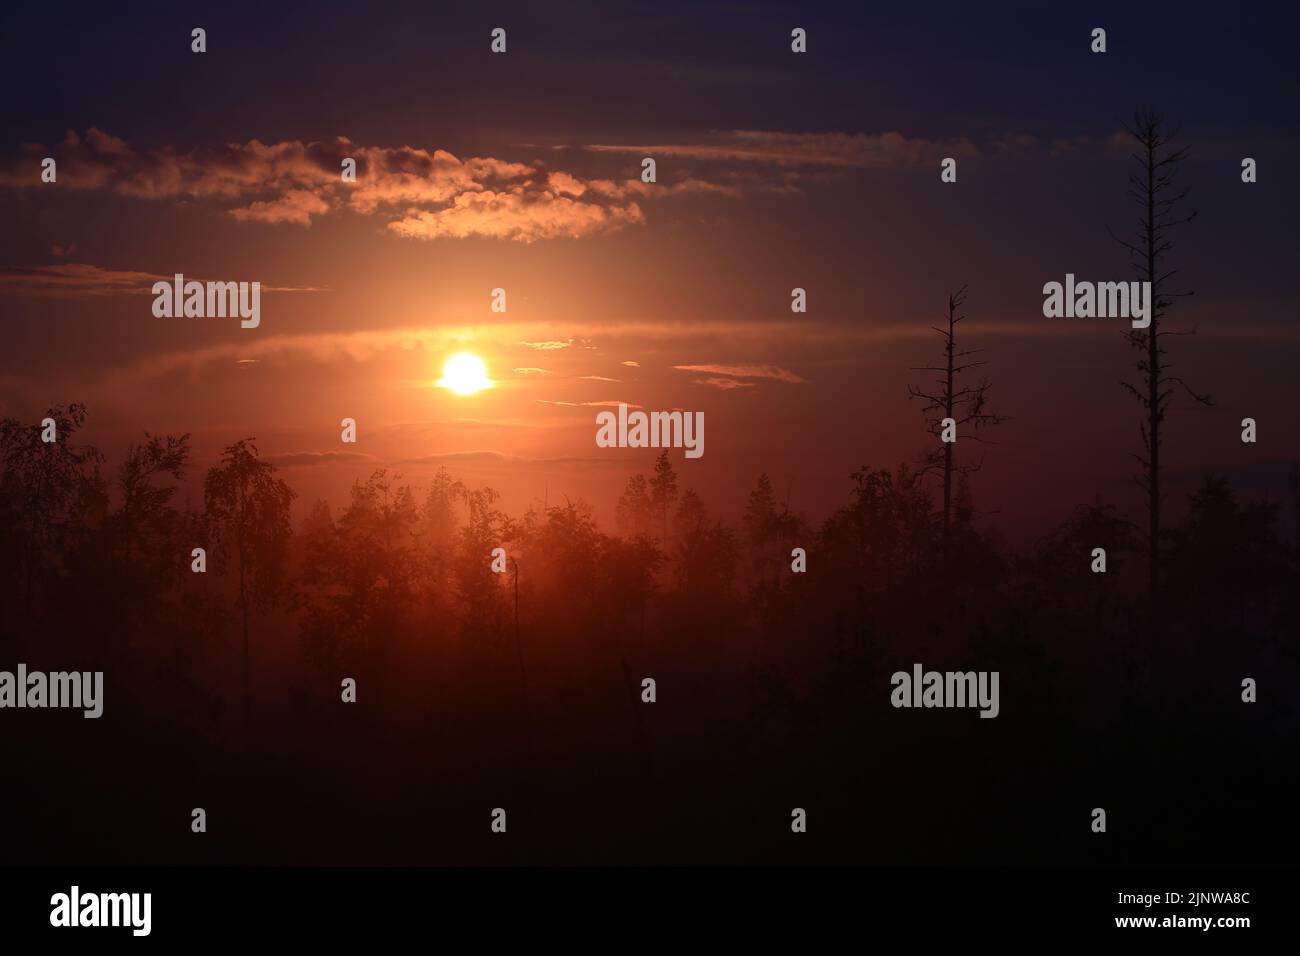 Misty sunset over a mysterious forest silhouette. Stock Photo